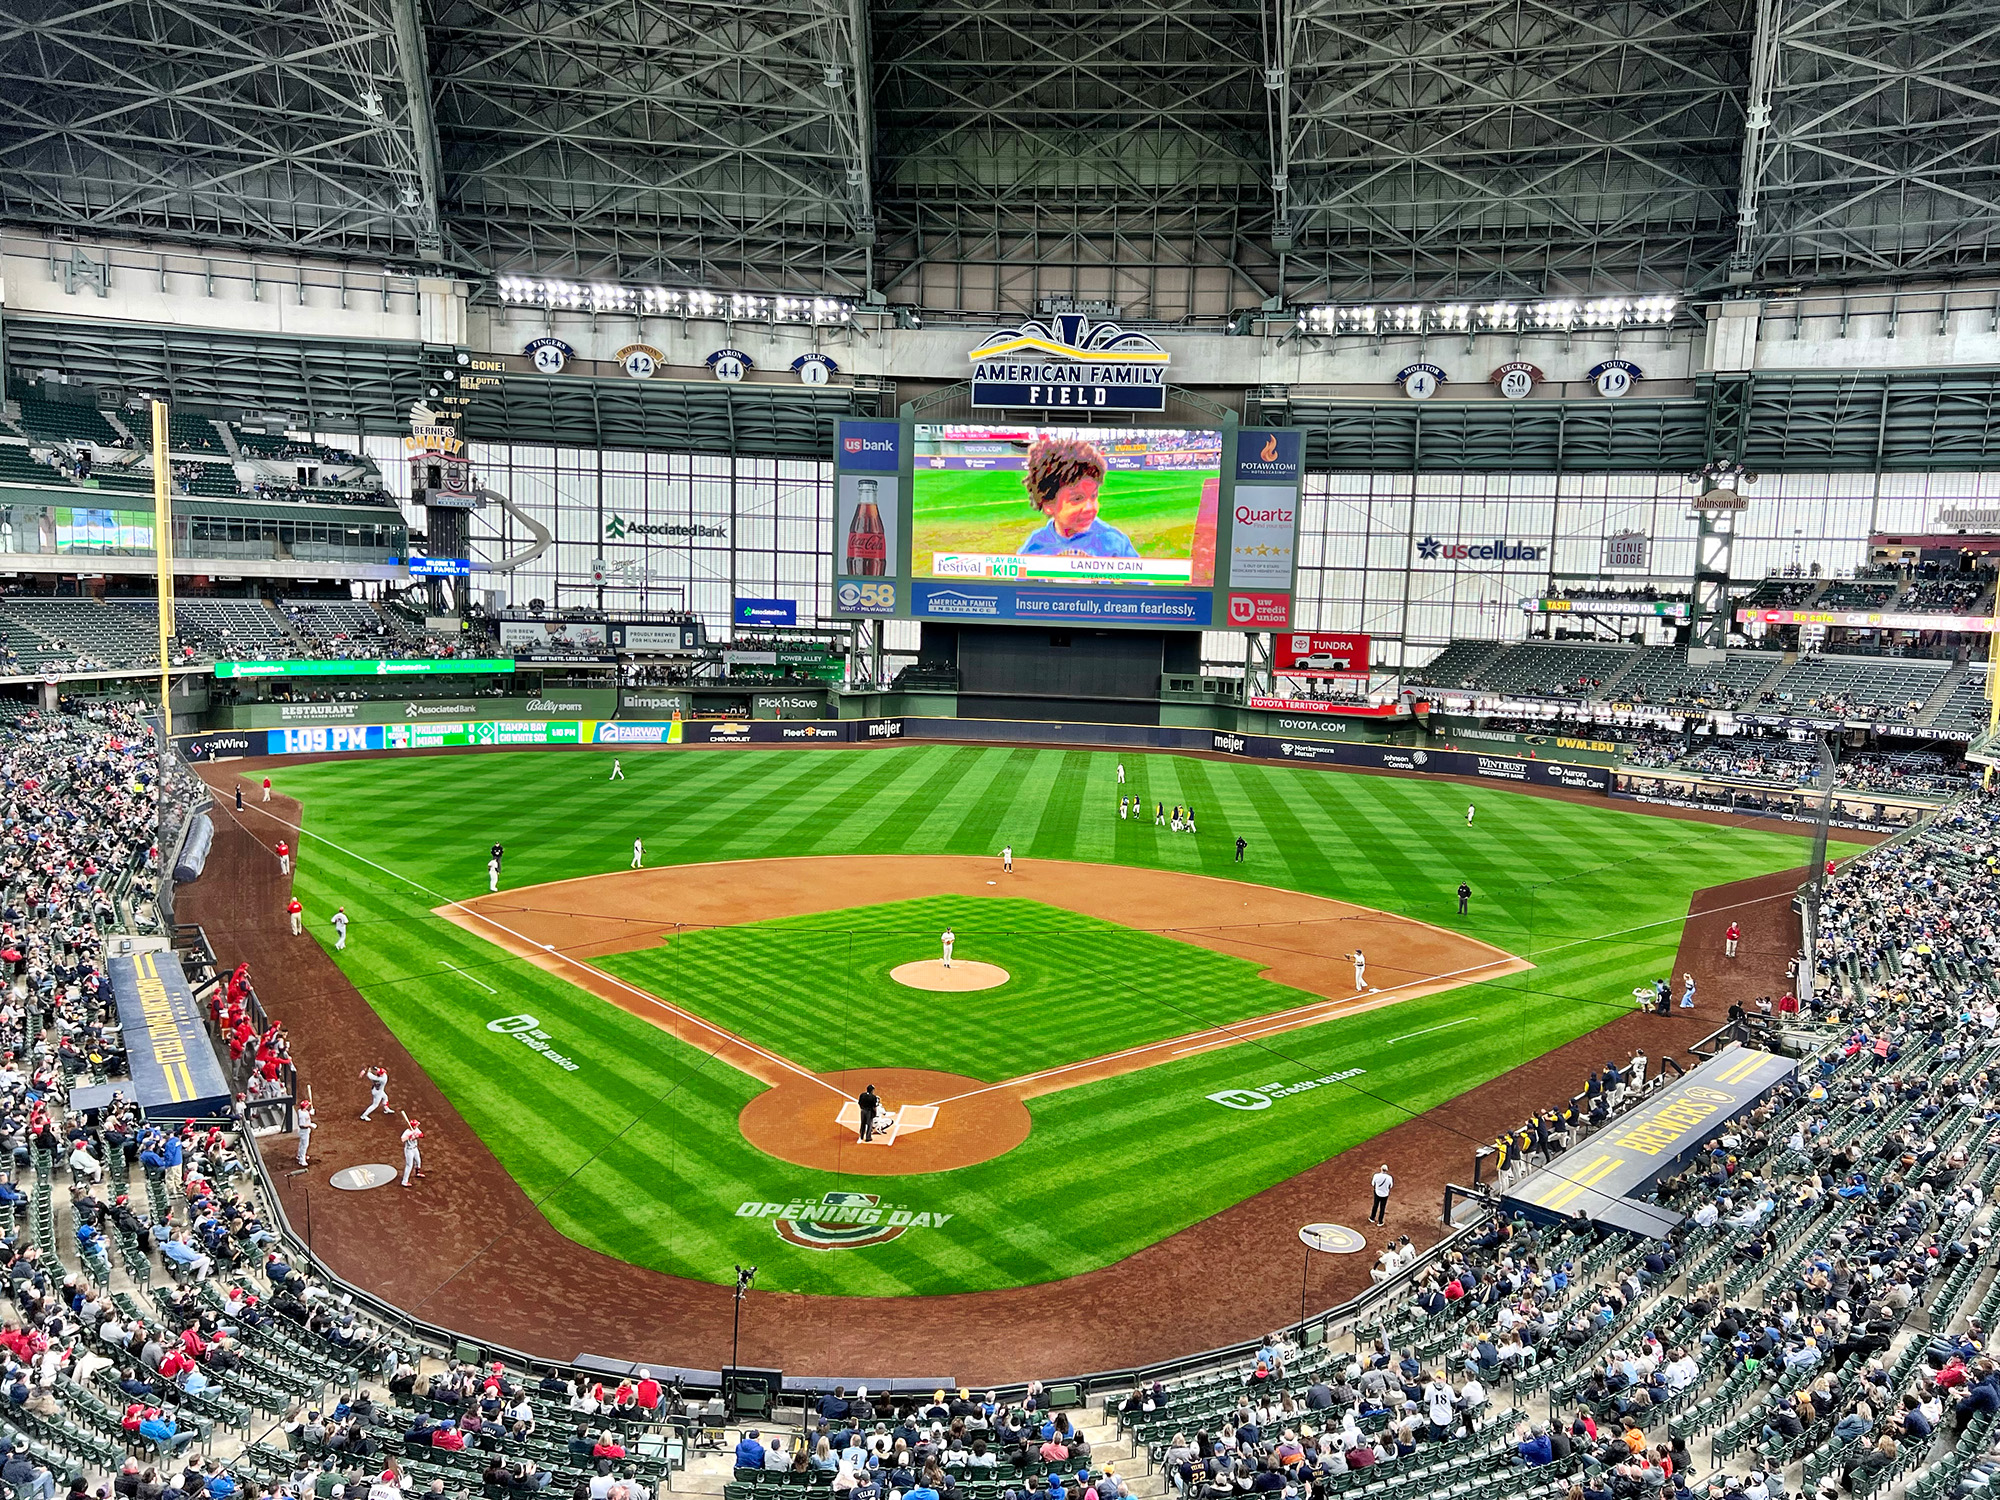 Brewers would pay less for American Family Field renovations under